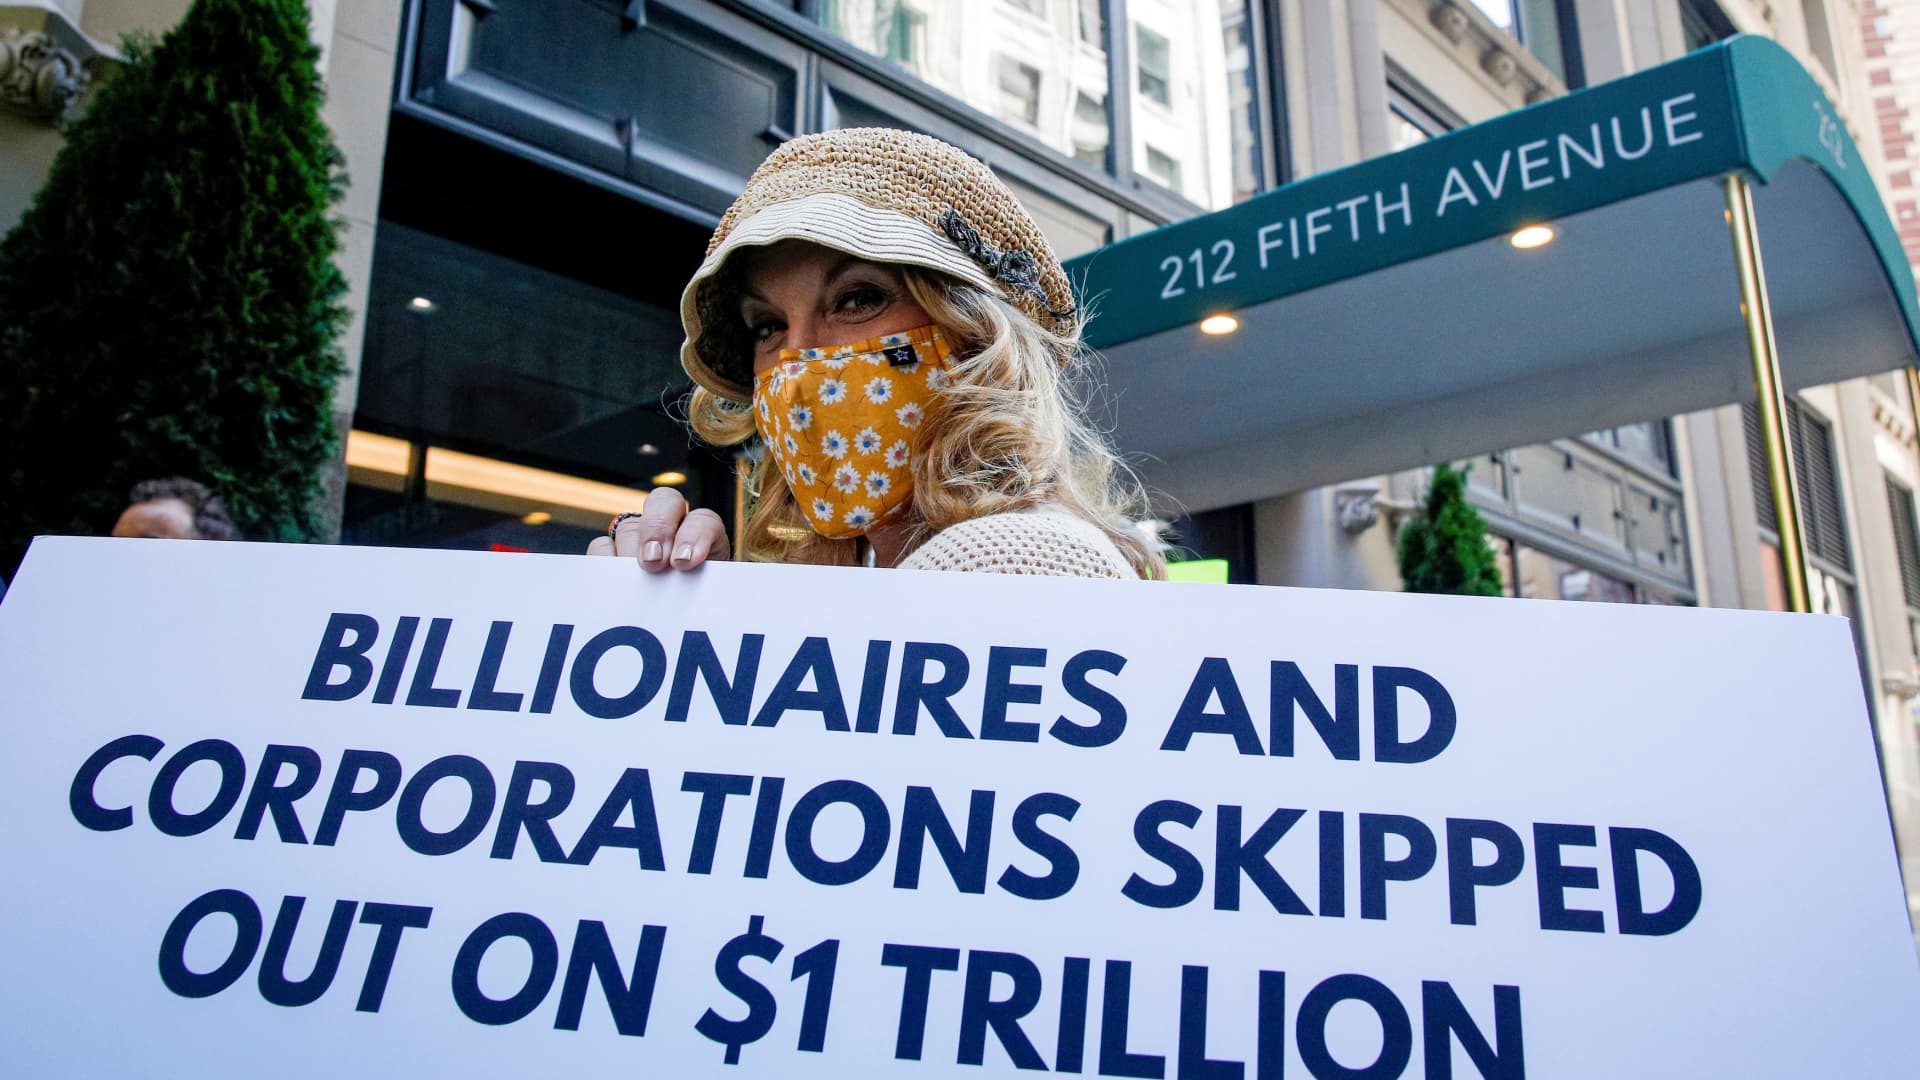 Members of the Patriotic Millionaires hold a federal tax filing day protest outside the apartment of Amazon founder Jeff Bezos, to demand he pay his fair share of taxes, in New York City, May 17, 2021.